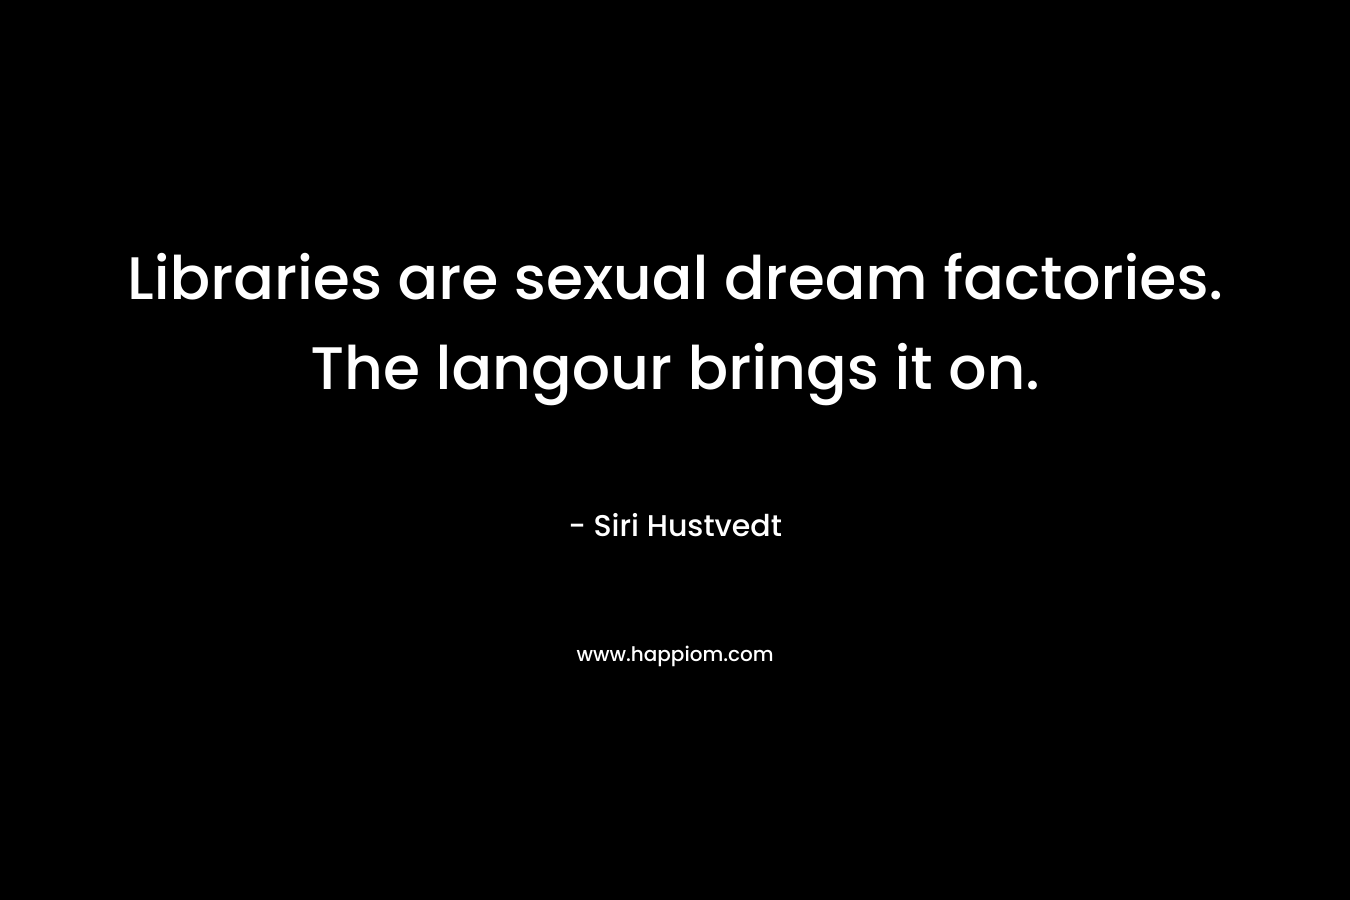 Libraries are sexual dream factories. The langour brings it on.